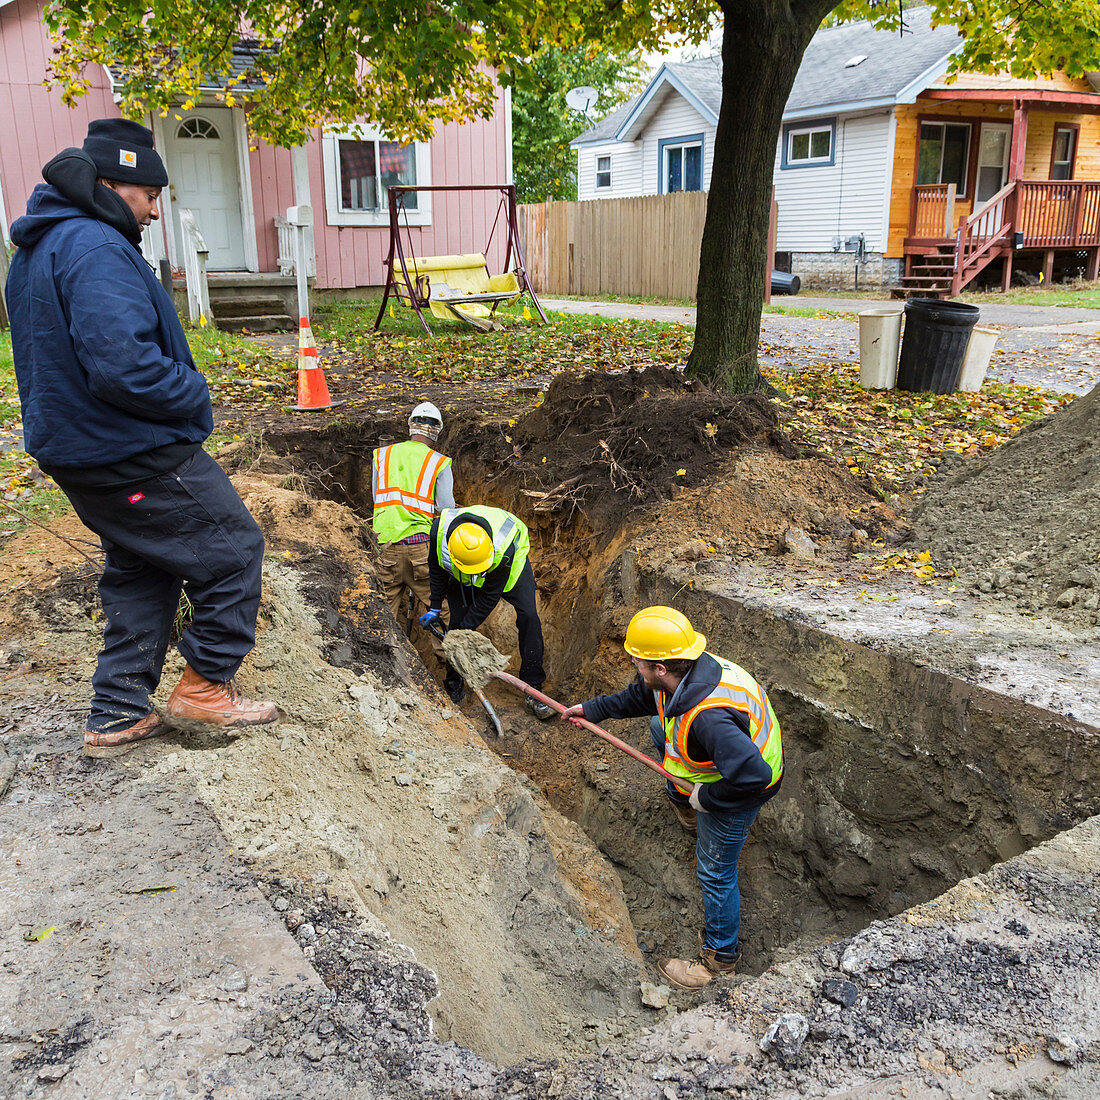 Water pipe replacement, Michigan, USA